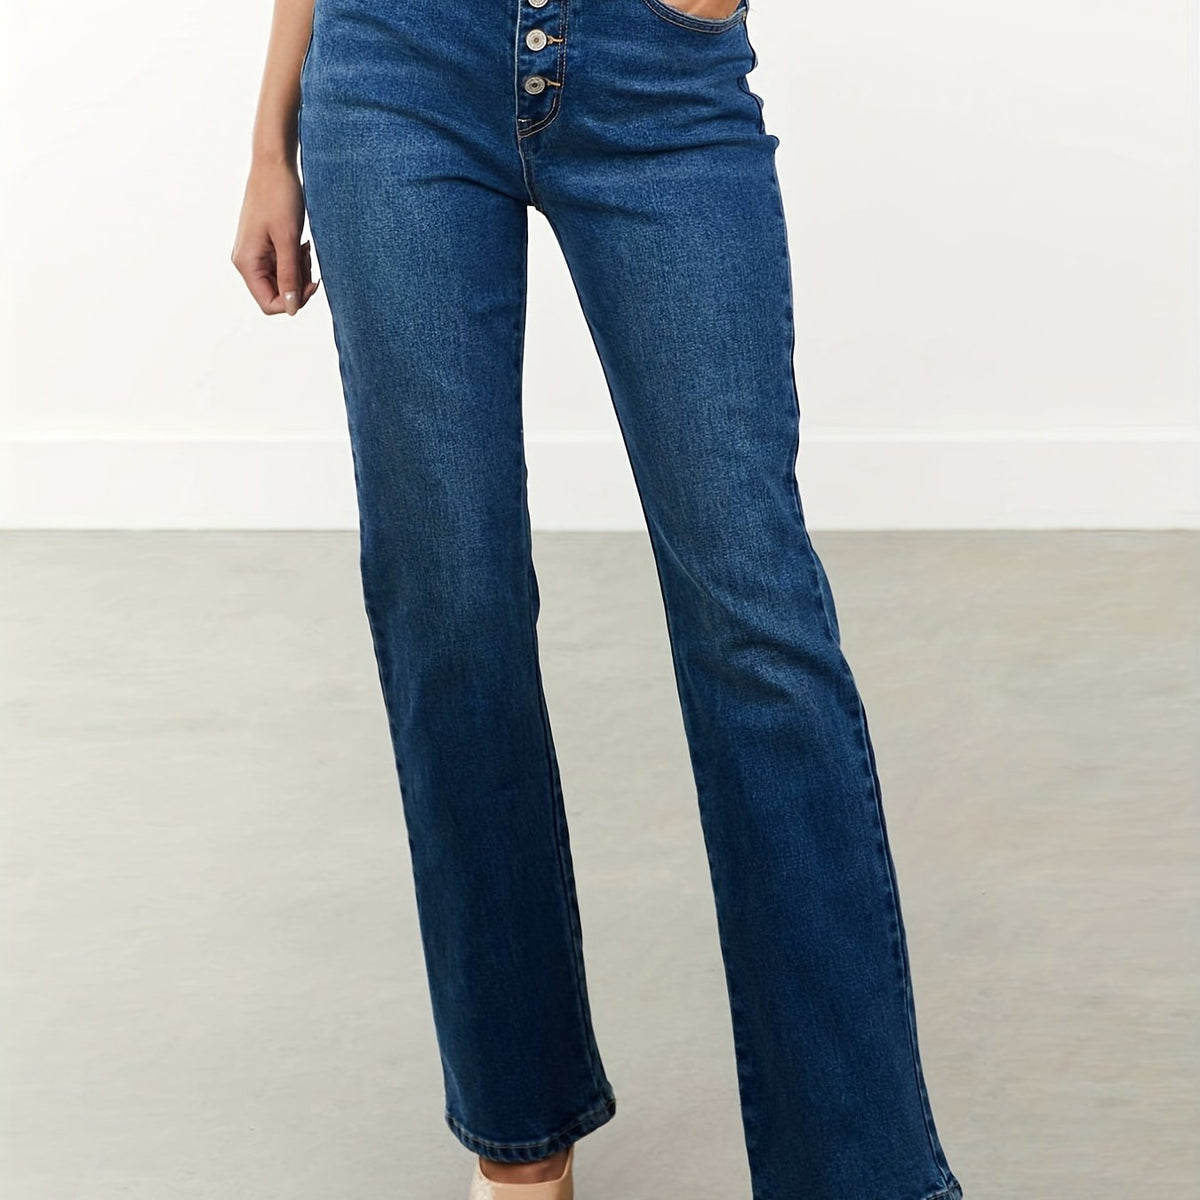 「binfenxie」Single-breasted Mid Rise Bootcut Jeans, Whiskering High Strech Bell Bottoms Denim Pants, Elegant Pants For Every Day, Women's Denim Jeans & Clothing